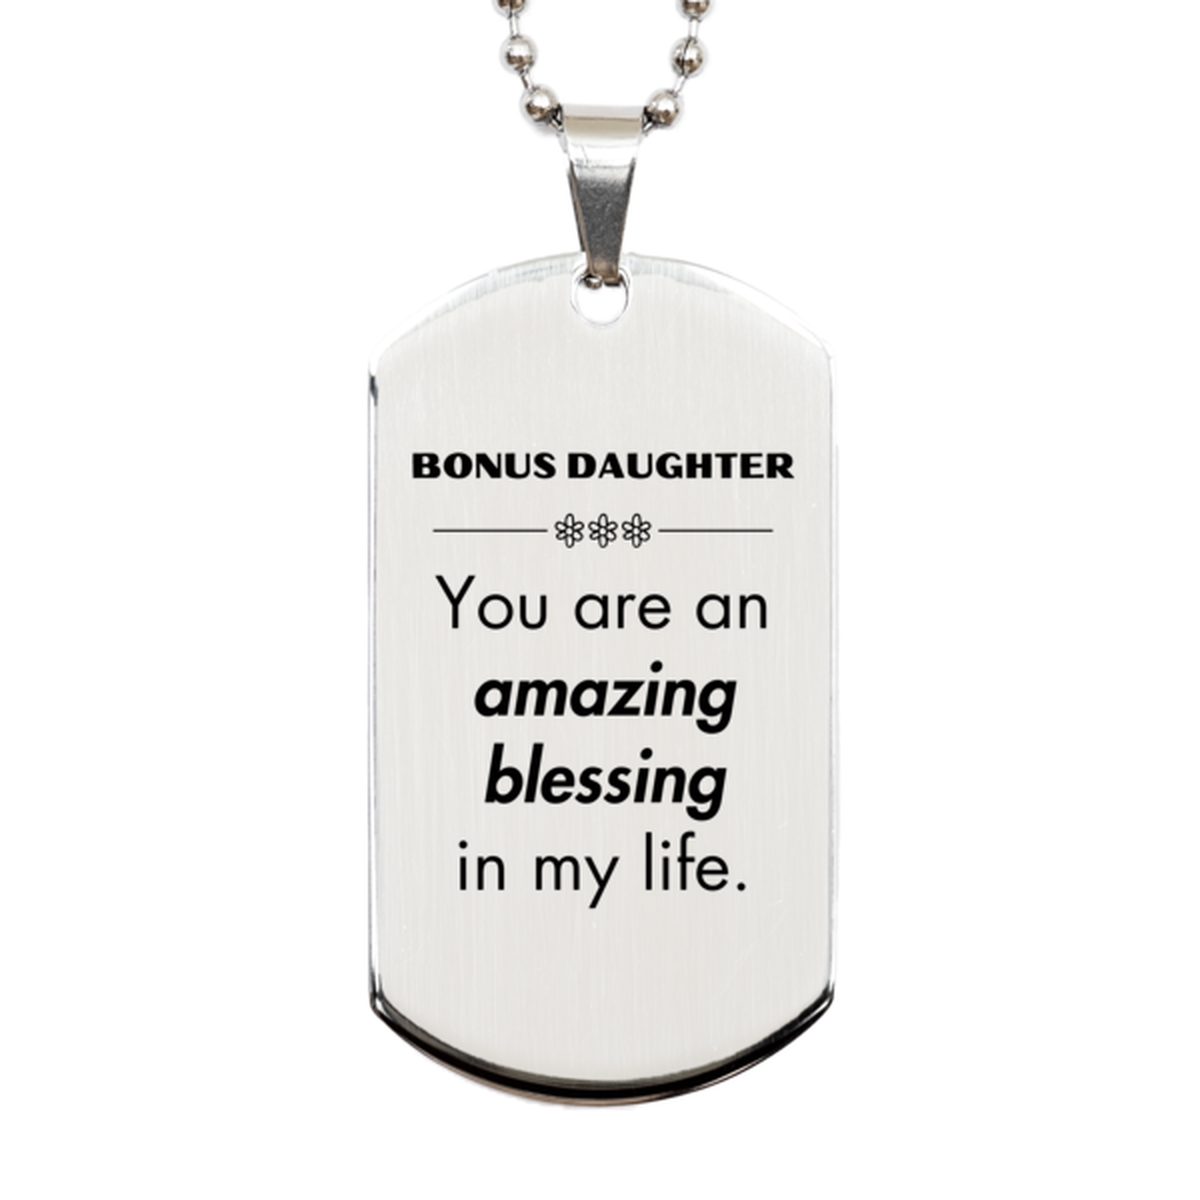 Bonus Daughter Silver Dog Tag, You are an amazing blessing in my life, Thank You Gifts For Bonus Daughter, Inspirational Birthday Christmas Unique Gifts For Bonus Daughter